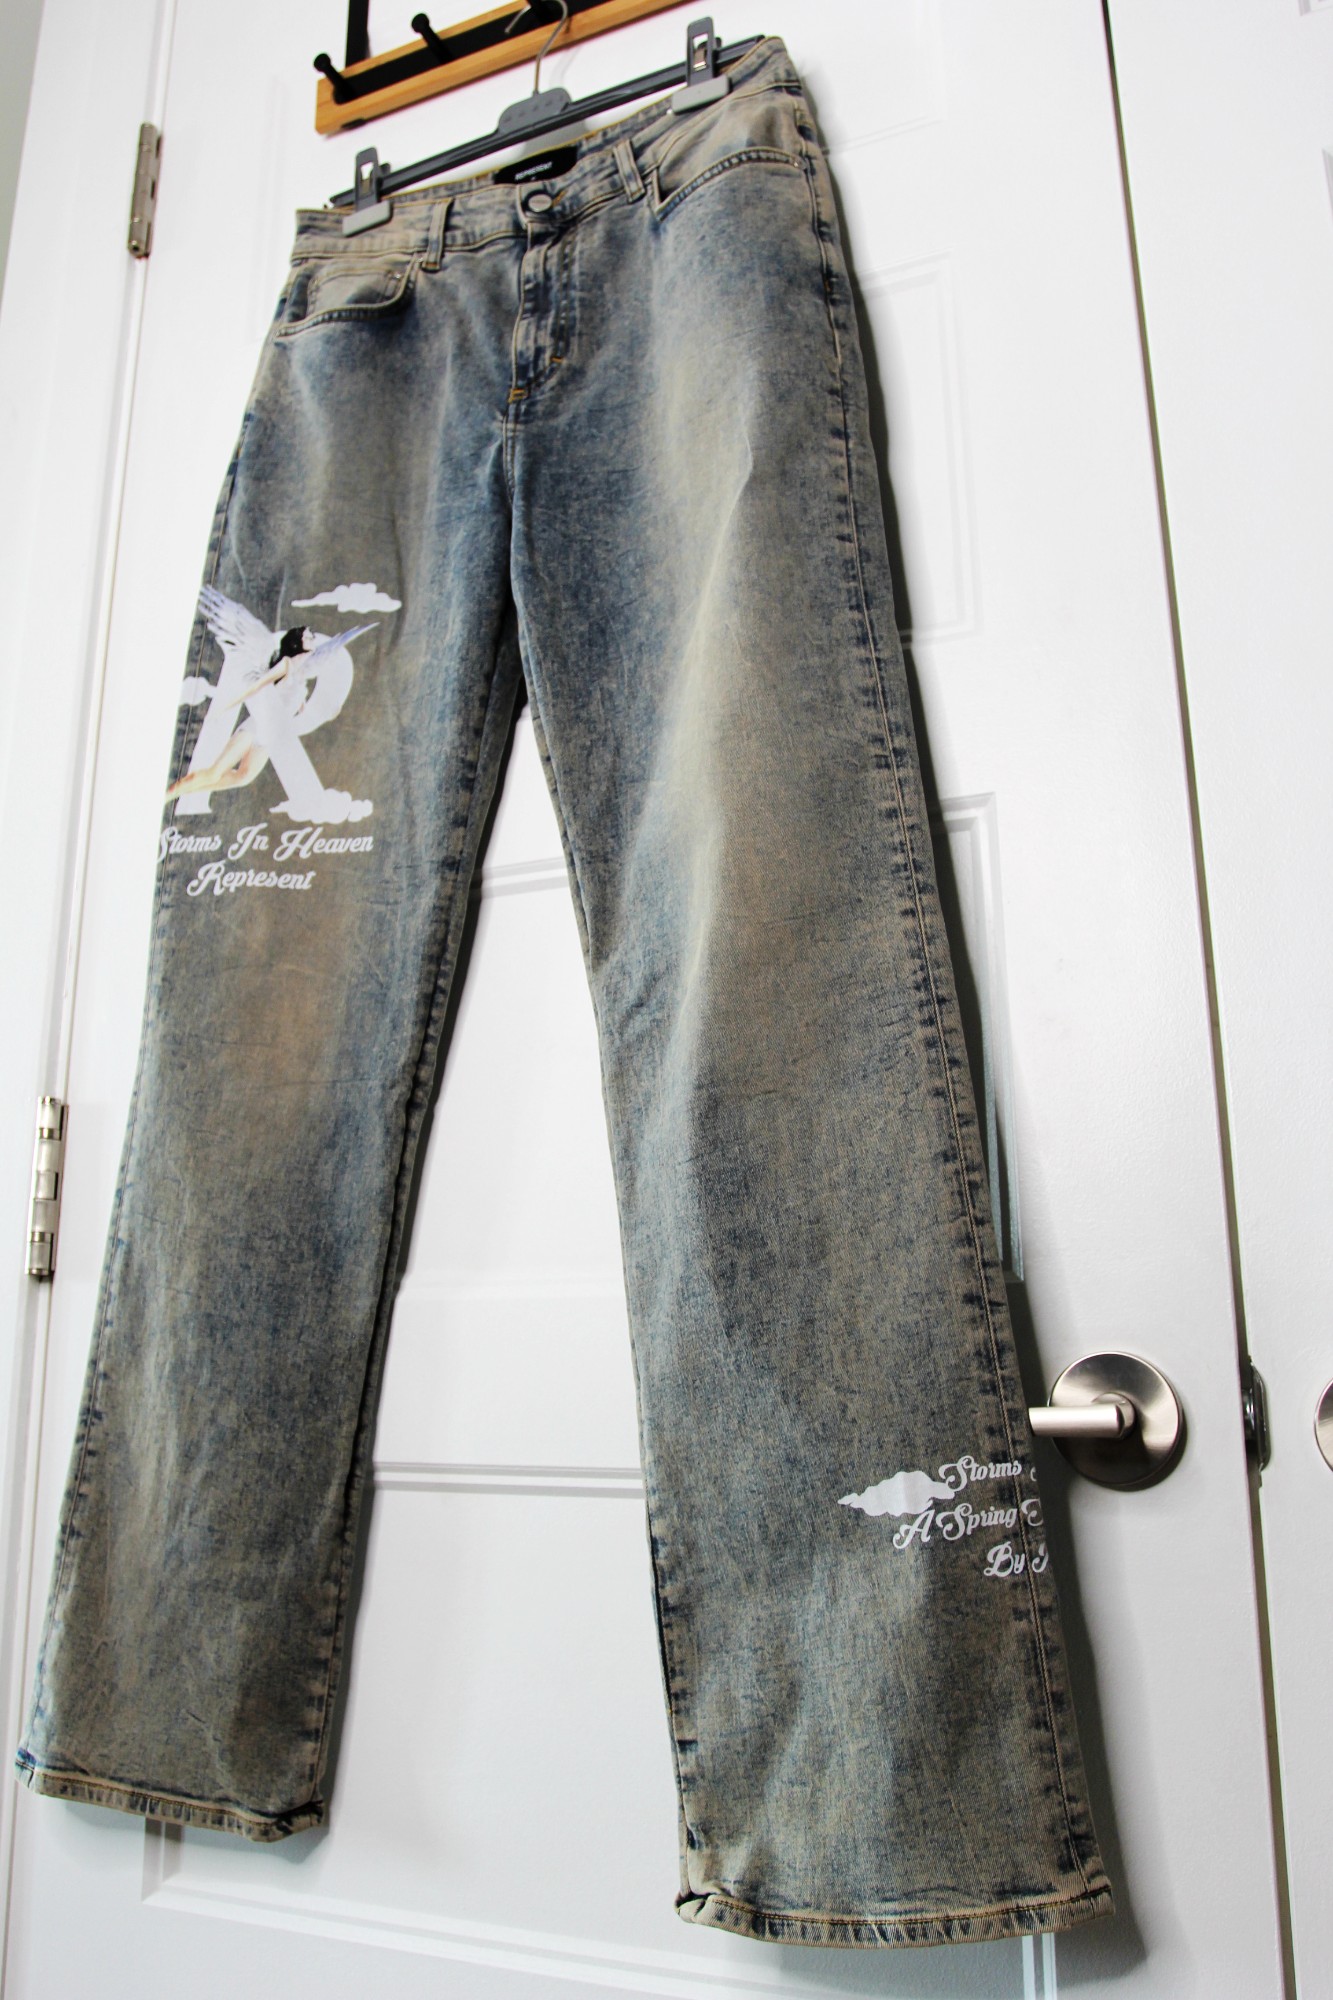 BNWT SS23 REPRESENT STORMS IN HEAVEAN JEANS 30 - 6